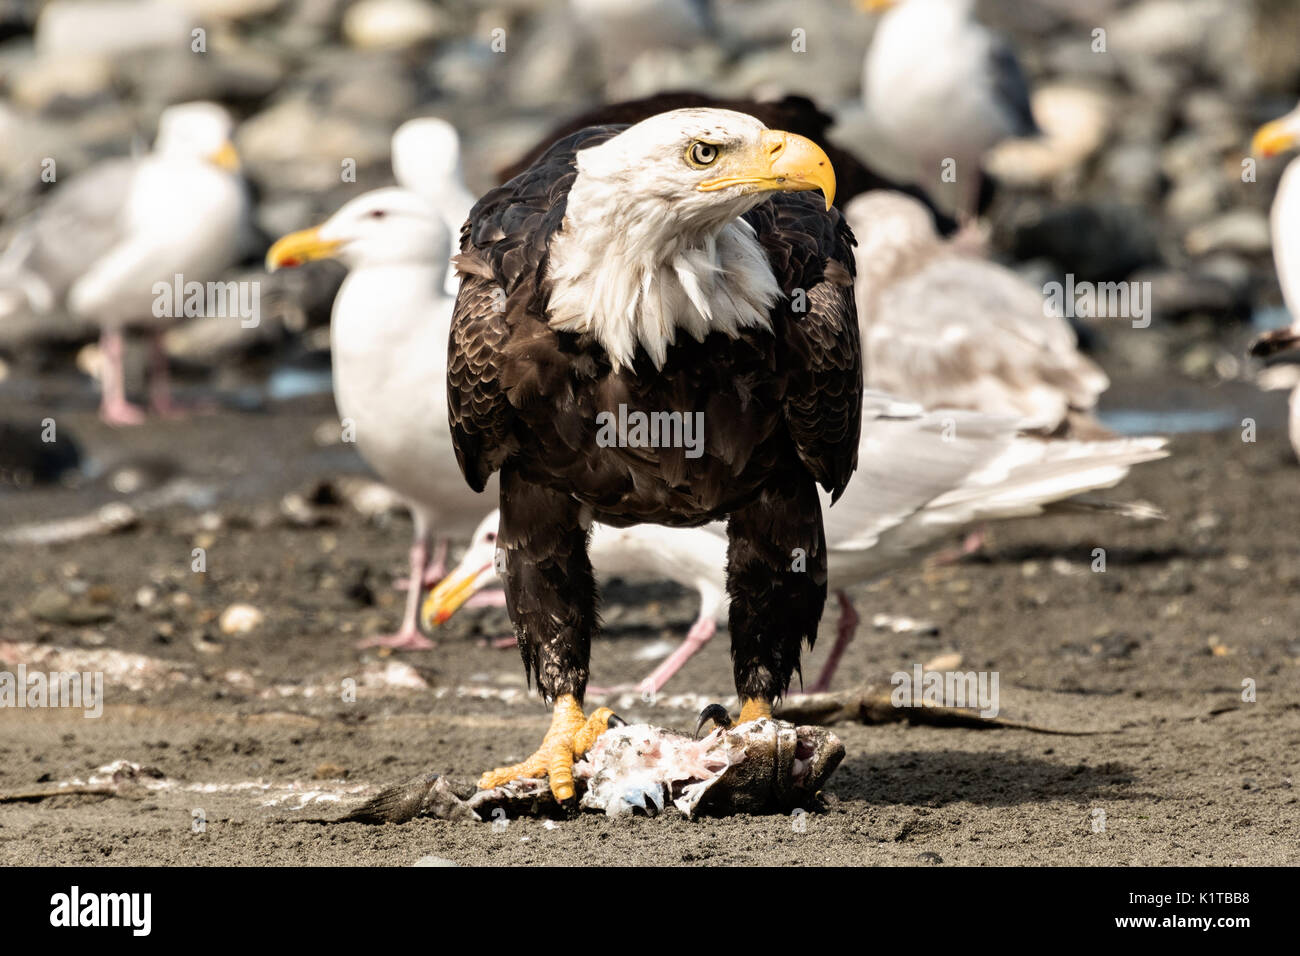 An adult bald eagle eats fish scraps surrounded by gulls on the beach at Anchor Point, Alaska. Stock Photo